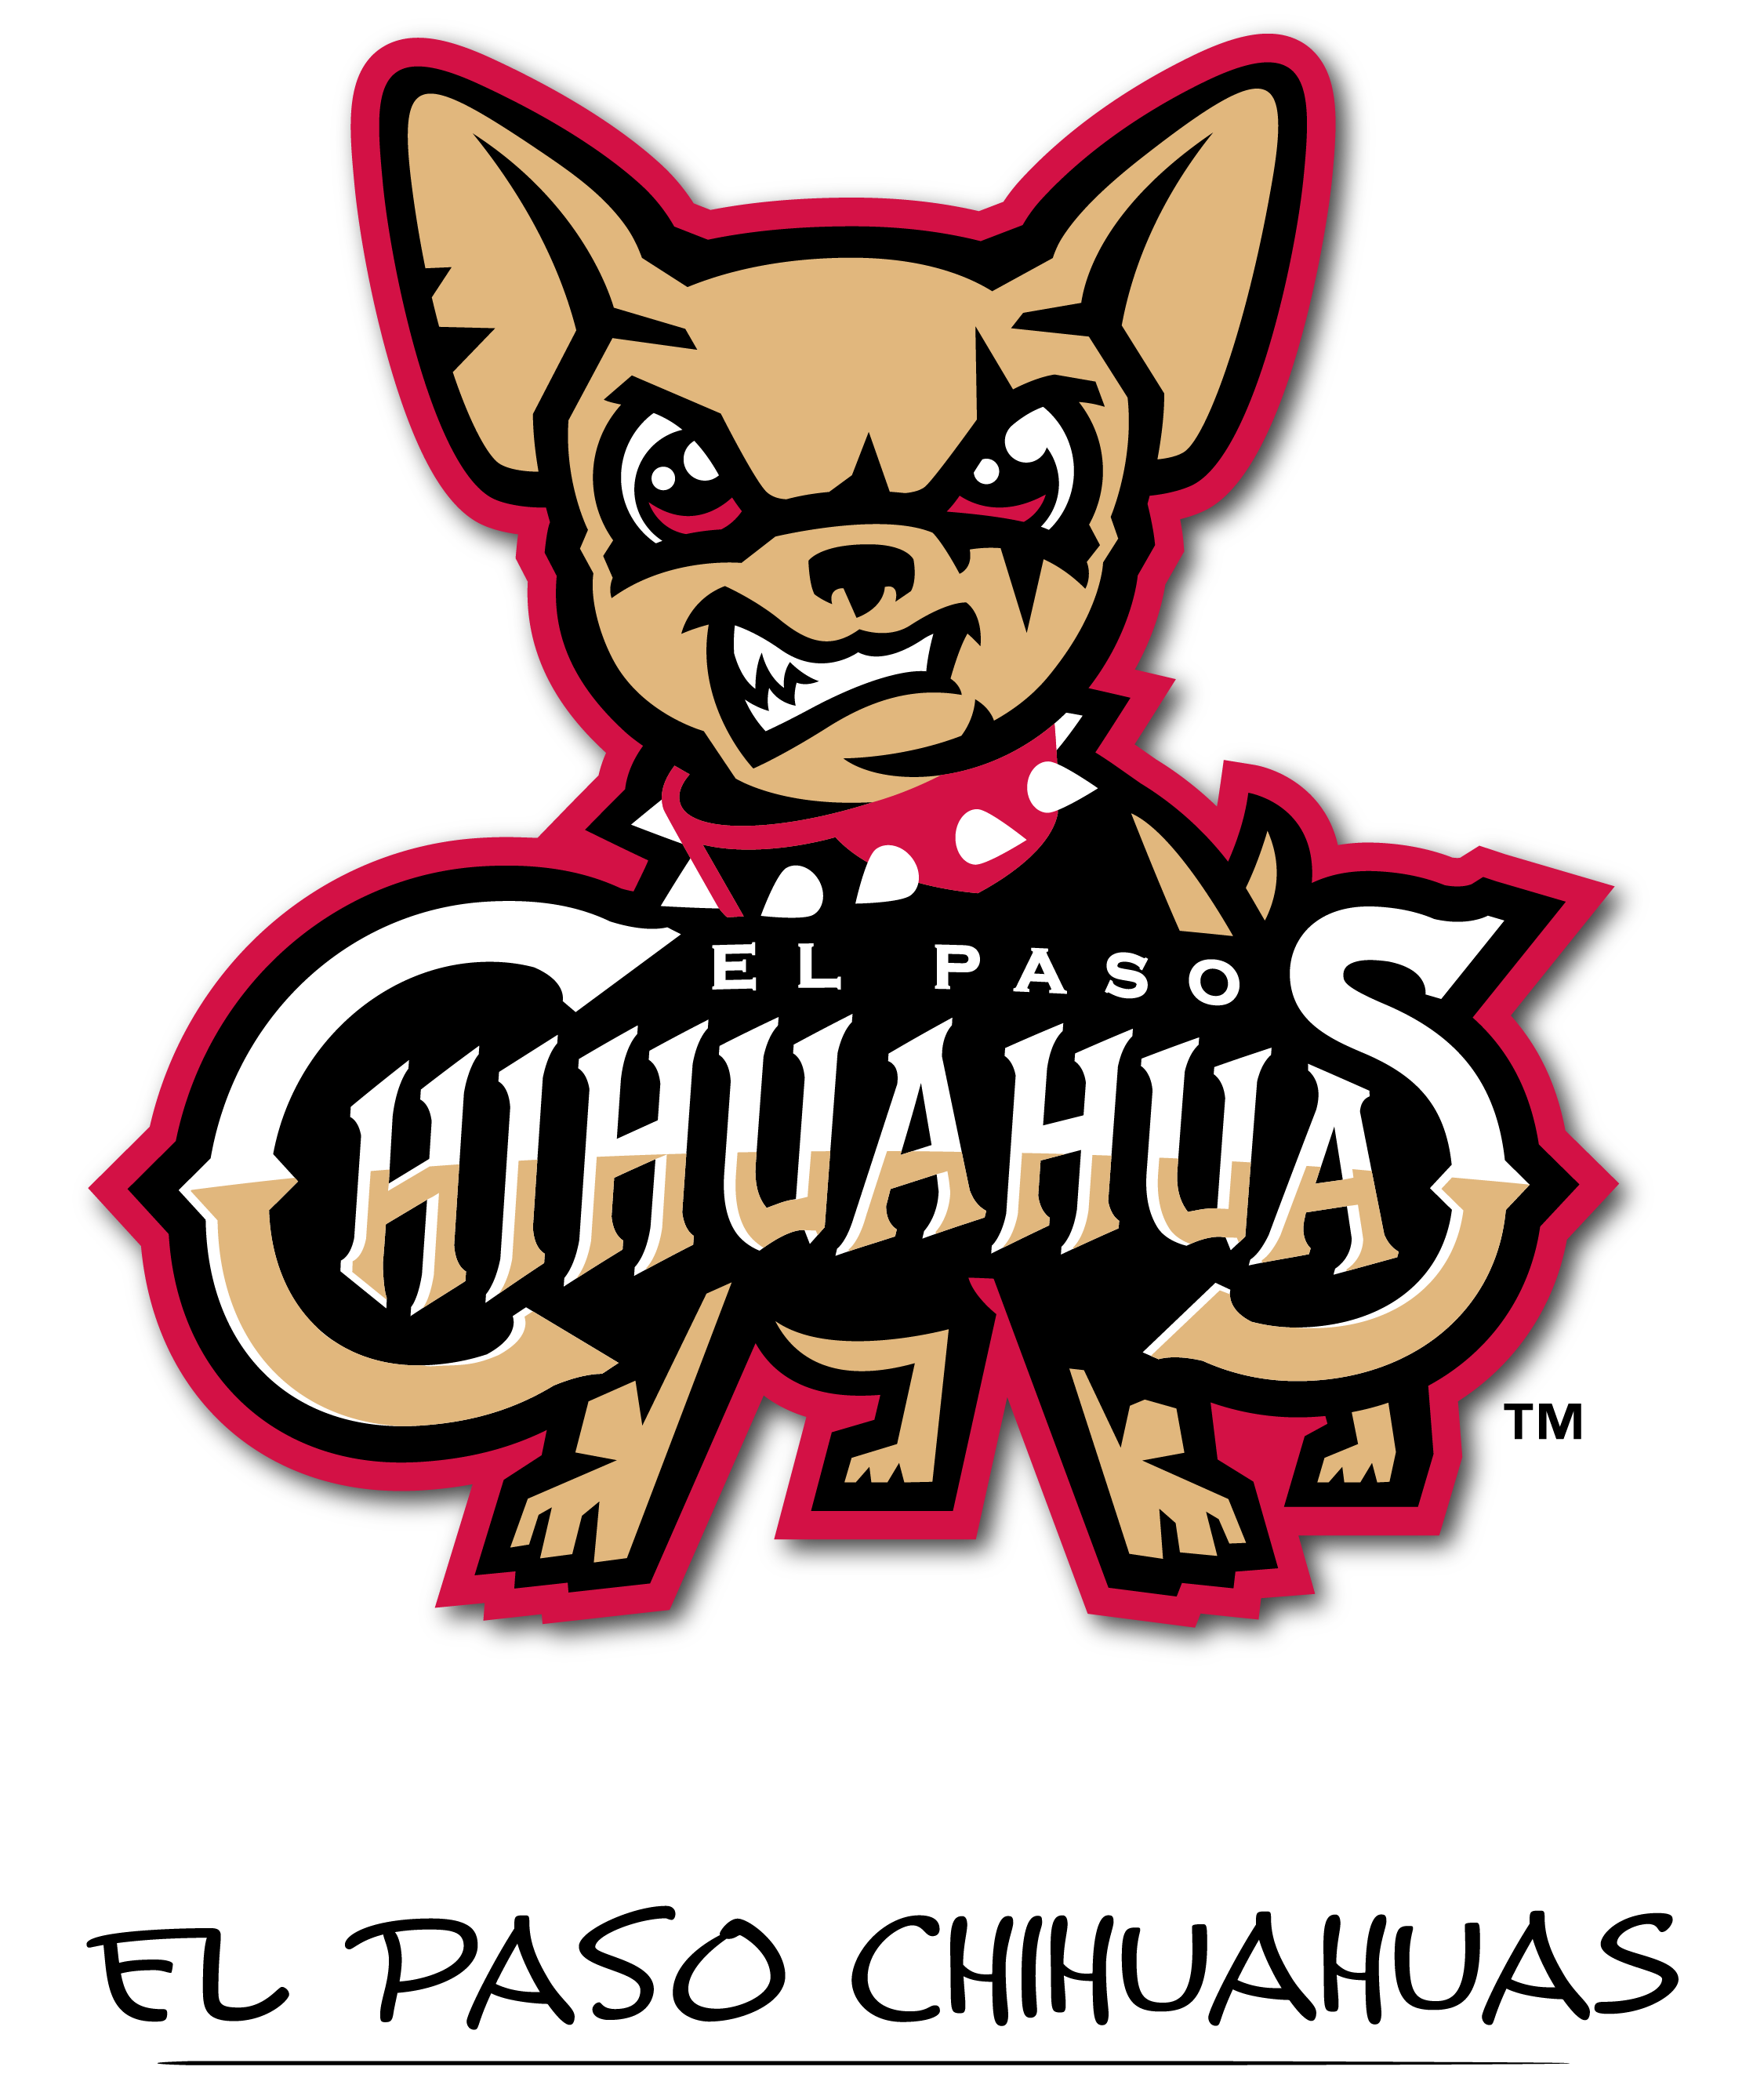 El Paso Chihuahuas on X: Top of the line uniform on a top of the